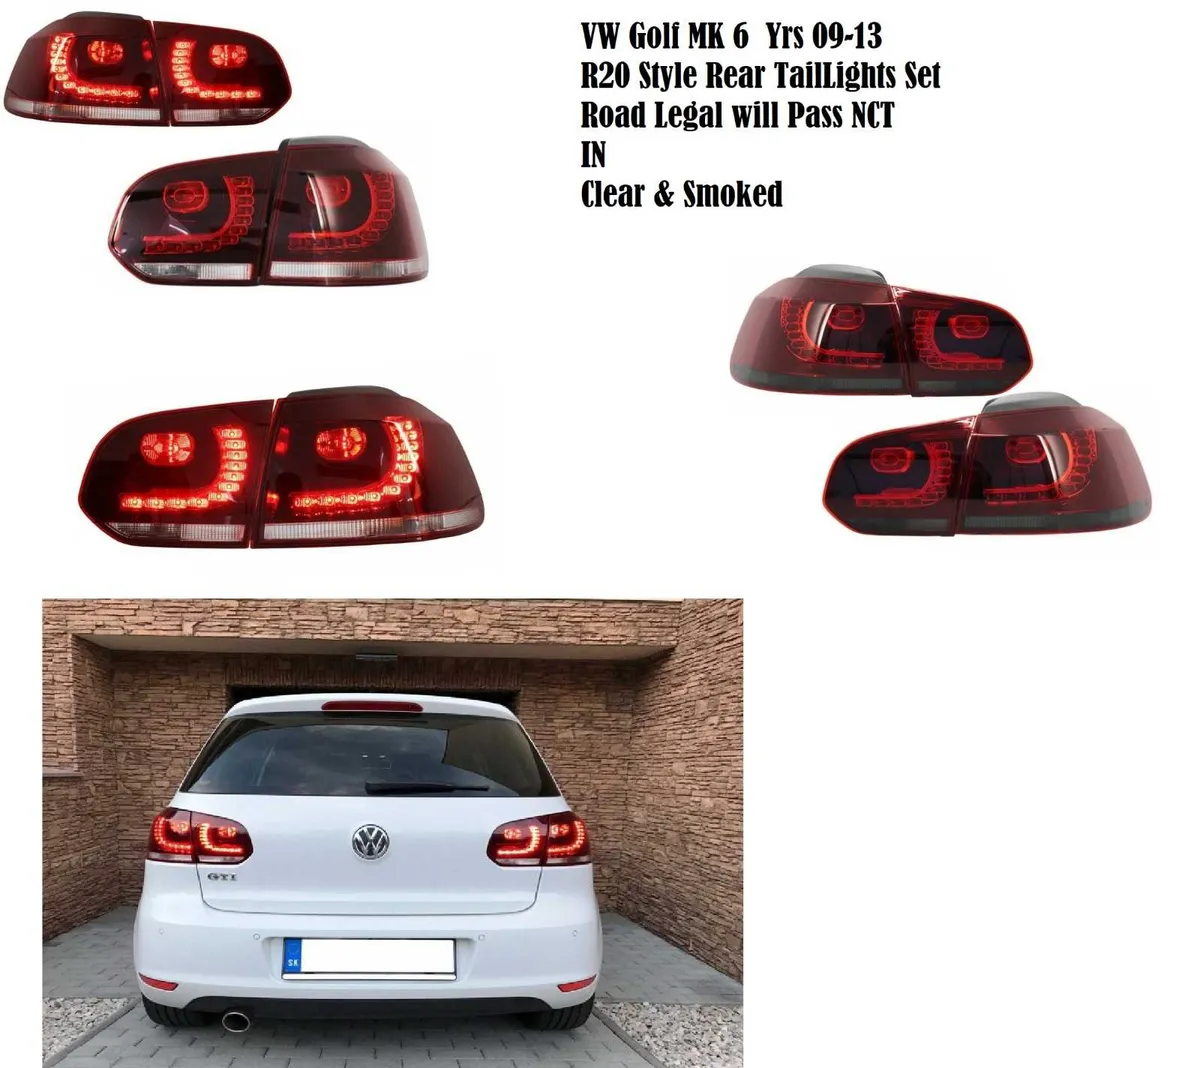 VW Golf MK6 GTI R20 Bumpers LED Taillights - Image 1